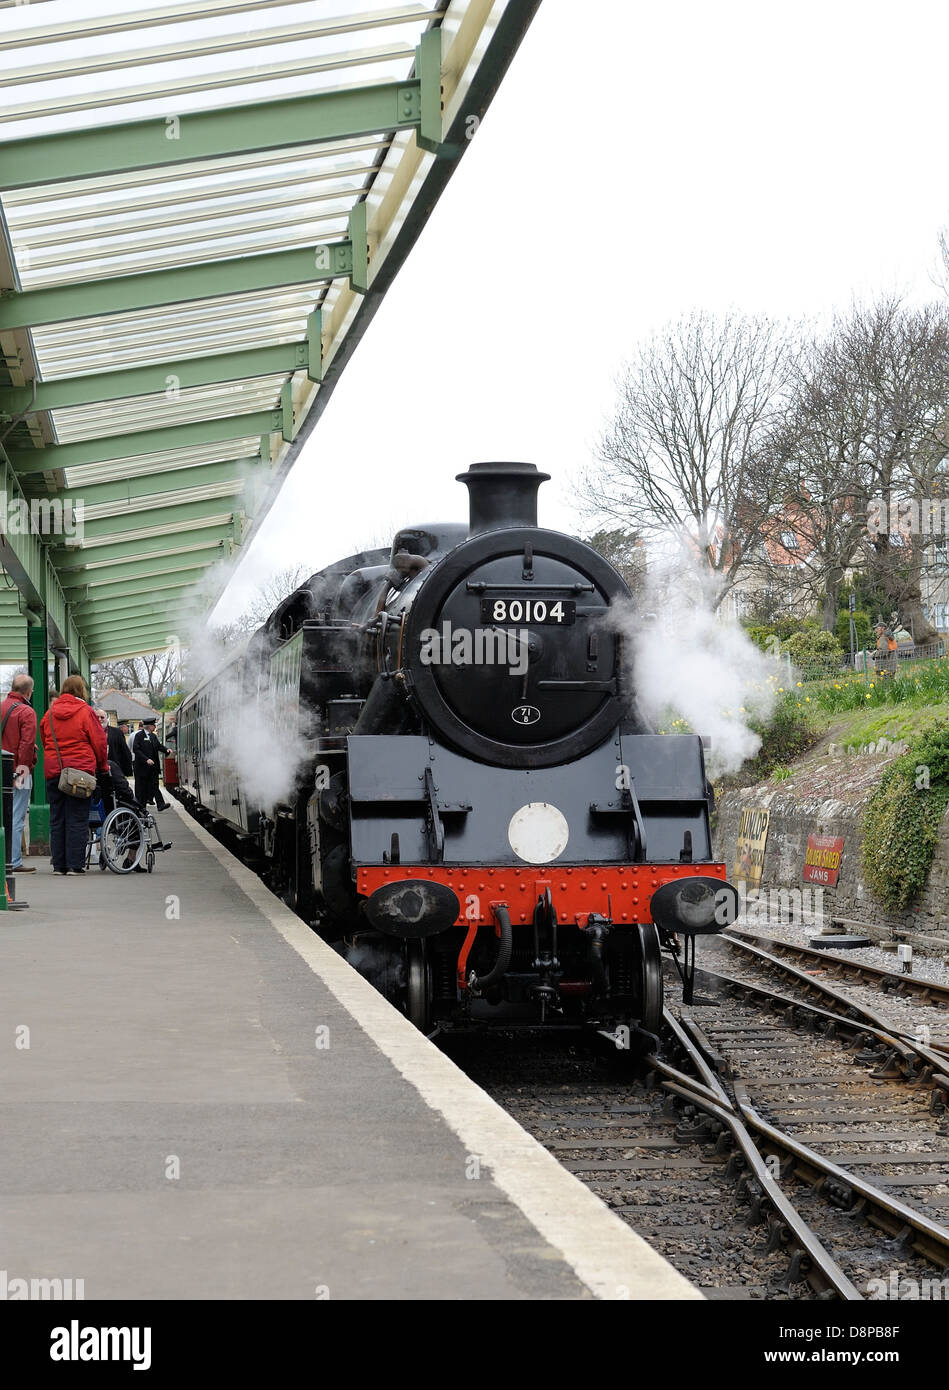 BR Standard Class 4 locomotive No. 80104 arriving a swanage with a service train from Corfe castle Dorset England uk Stock Photo